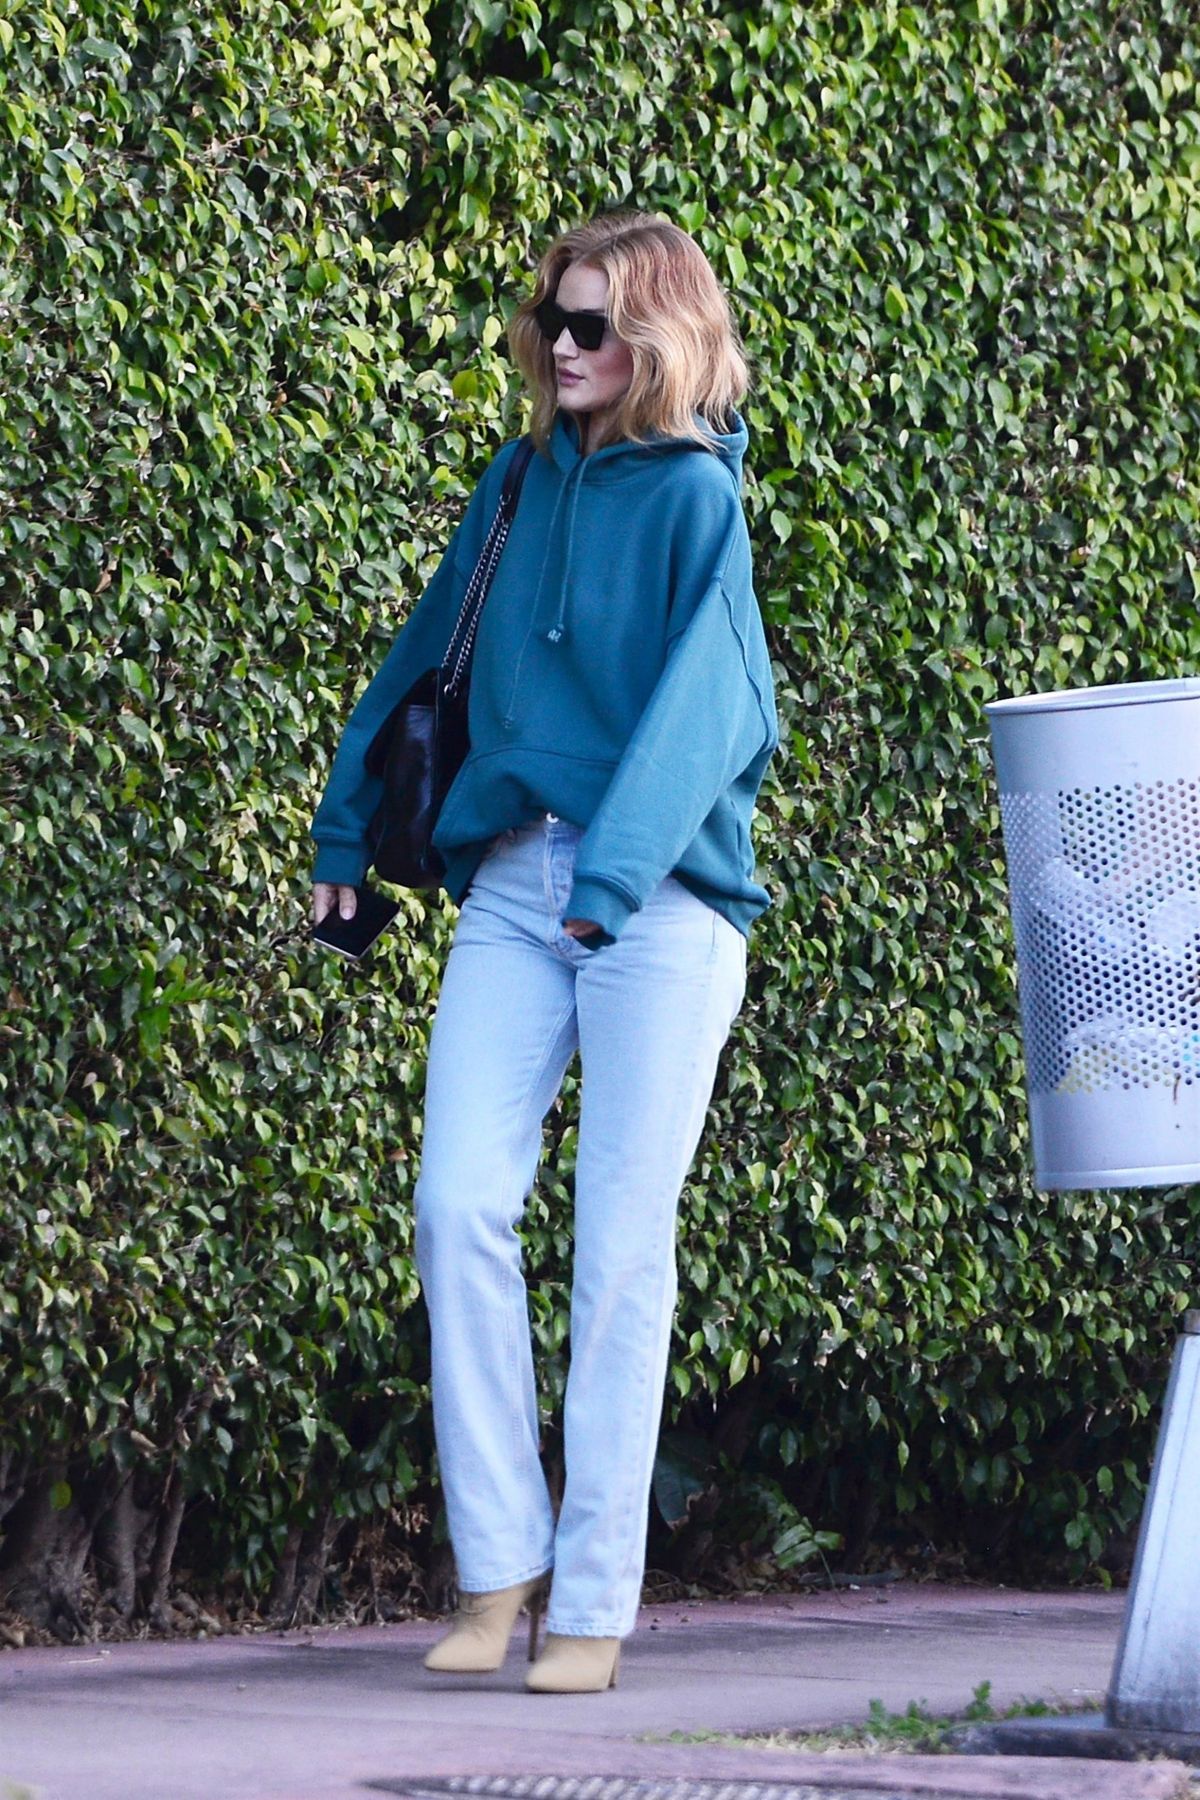 ROSIE HUNTINGTON-WHITELEY Out and About in Miami 01/07/2018 – HawtCelebs